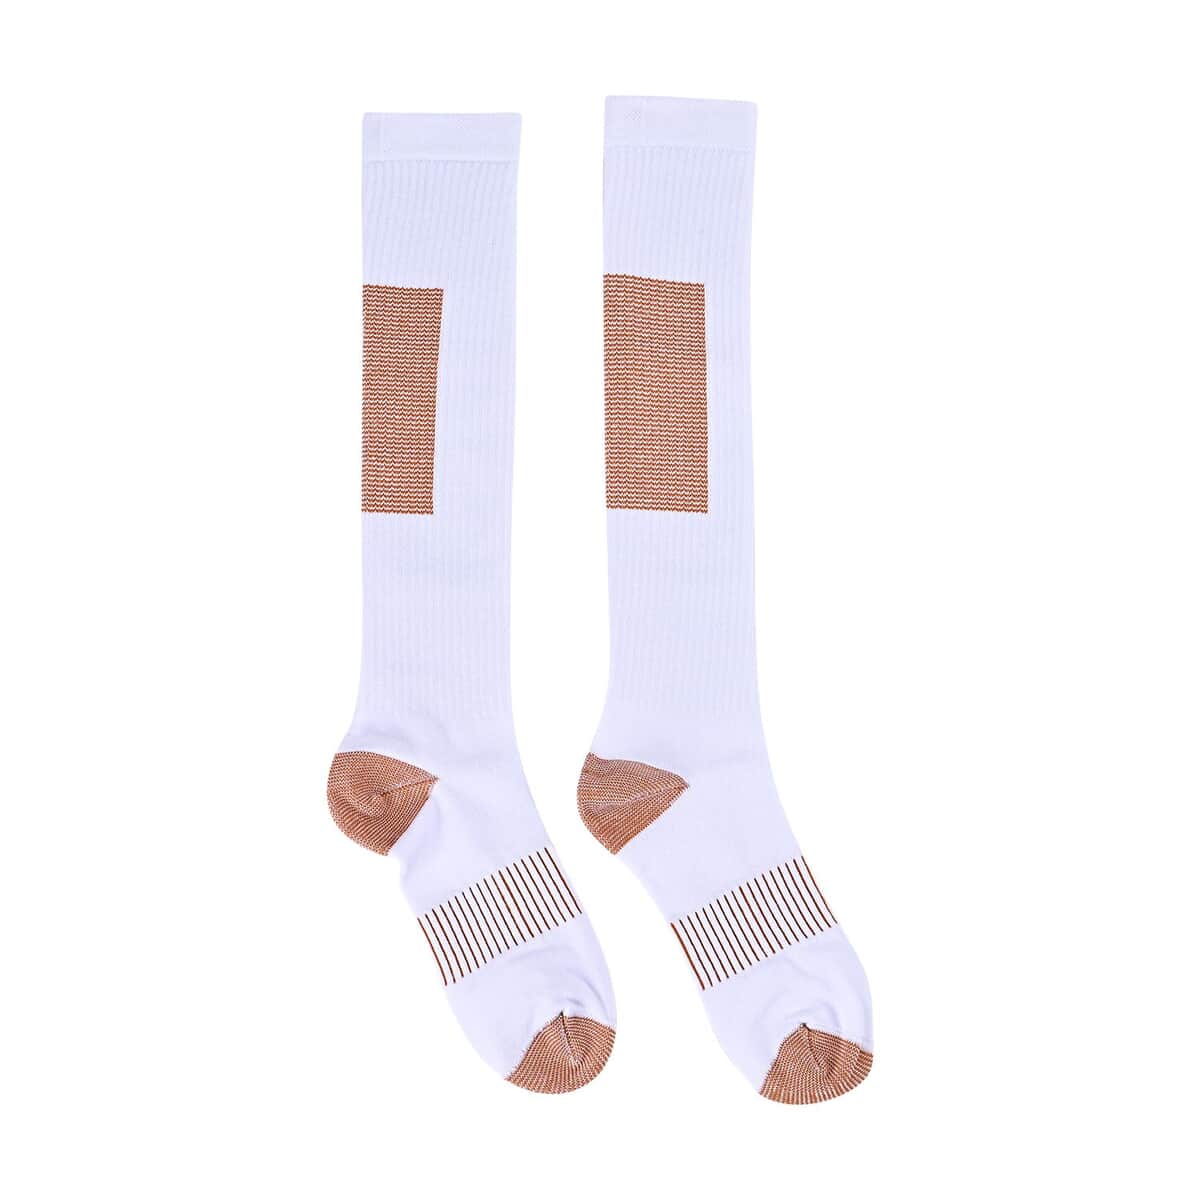 Set of 4 Pairs Knee Length Copper Infused Compression Socks - White (L/XL) image number 1